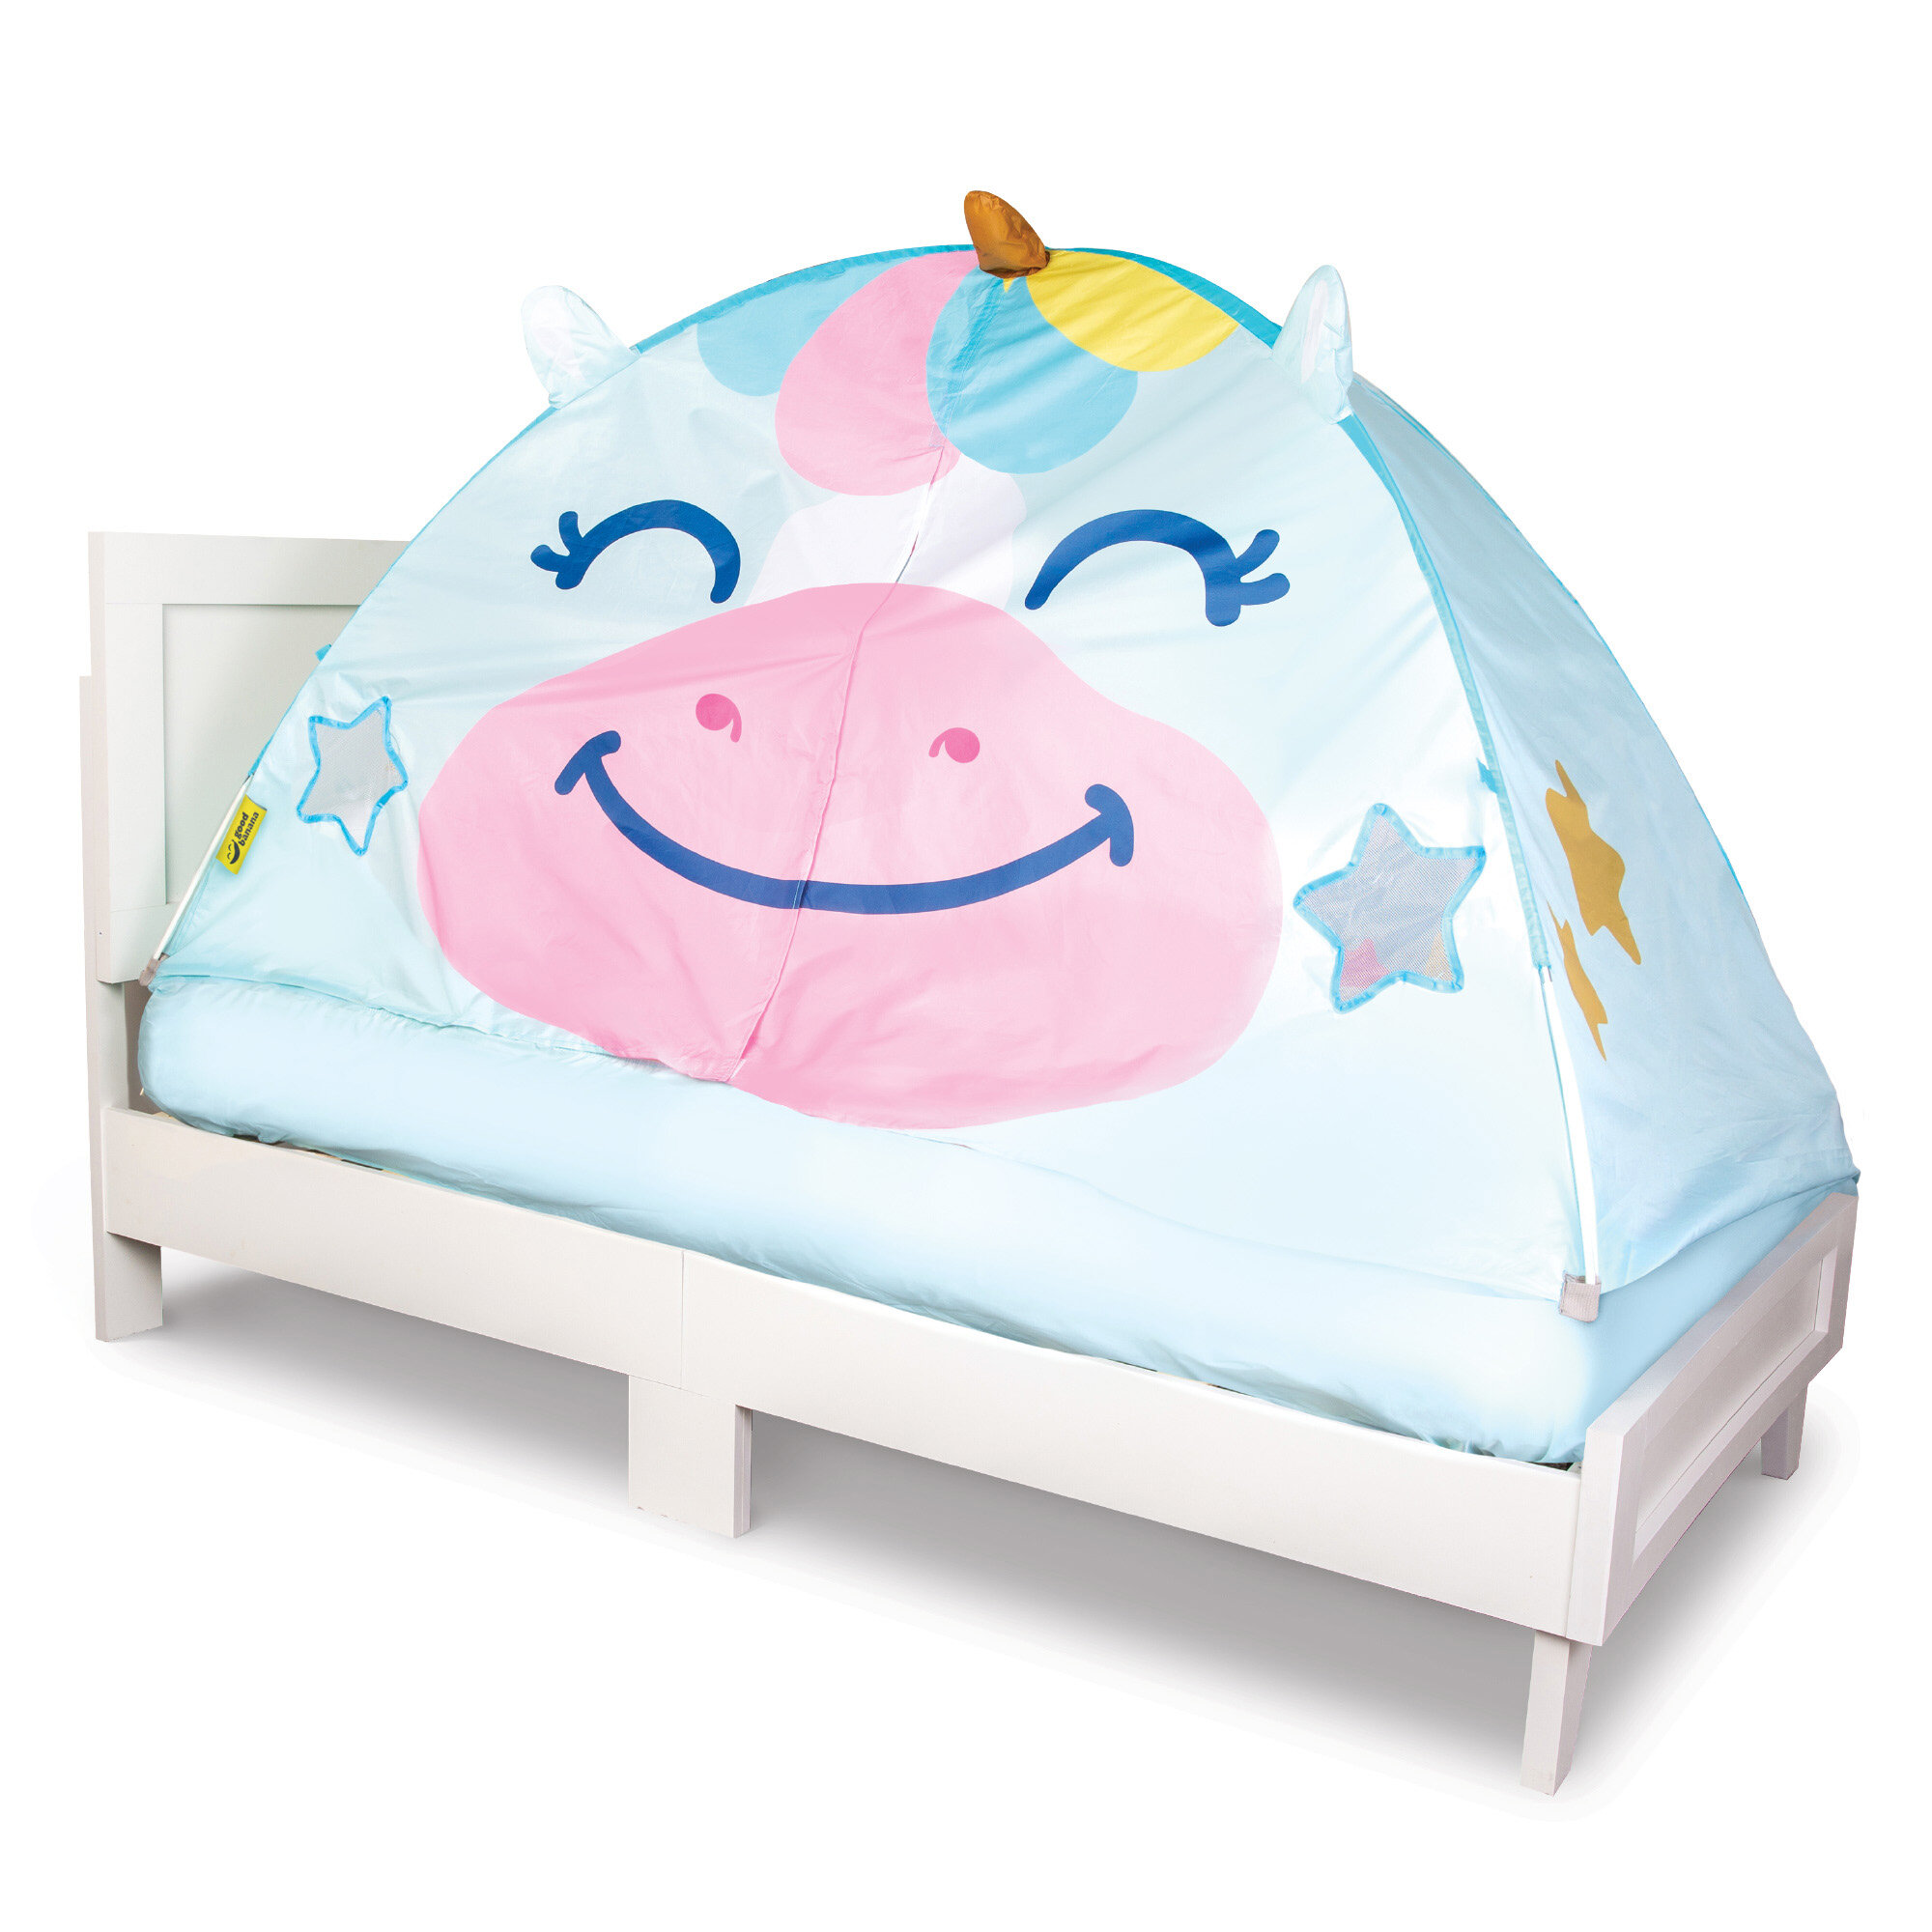 Dream Tents Unicorn Fits Twin Size Bed NEW in Carry Case